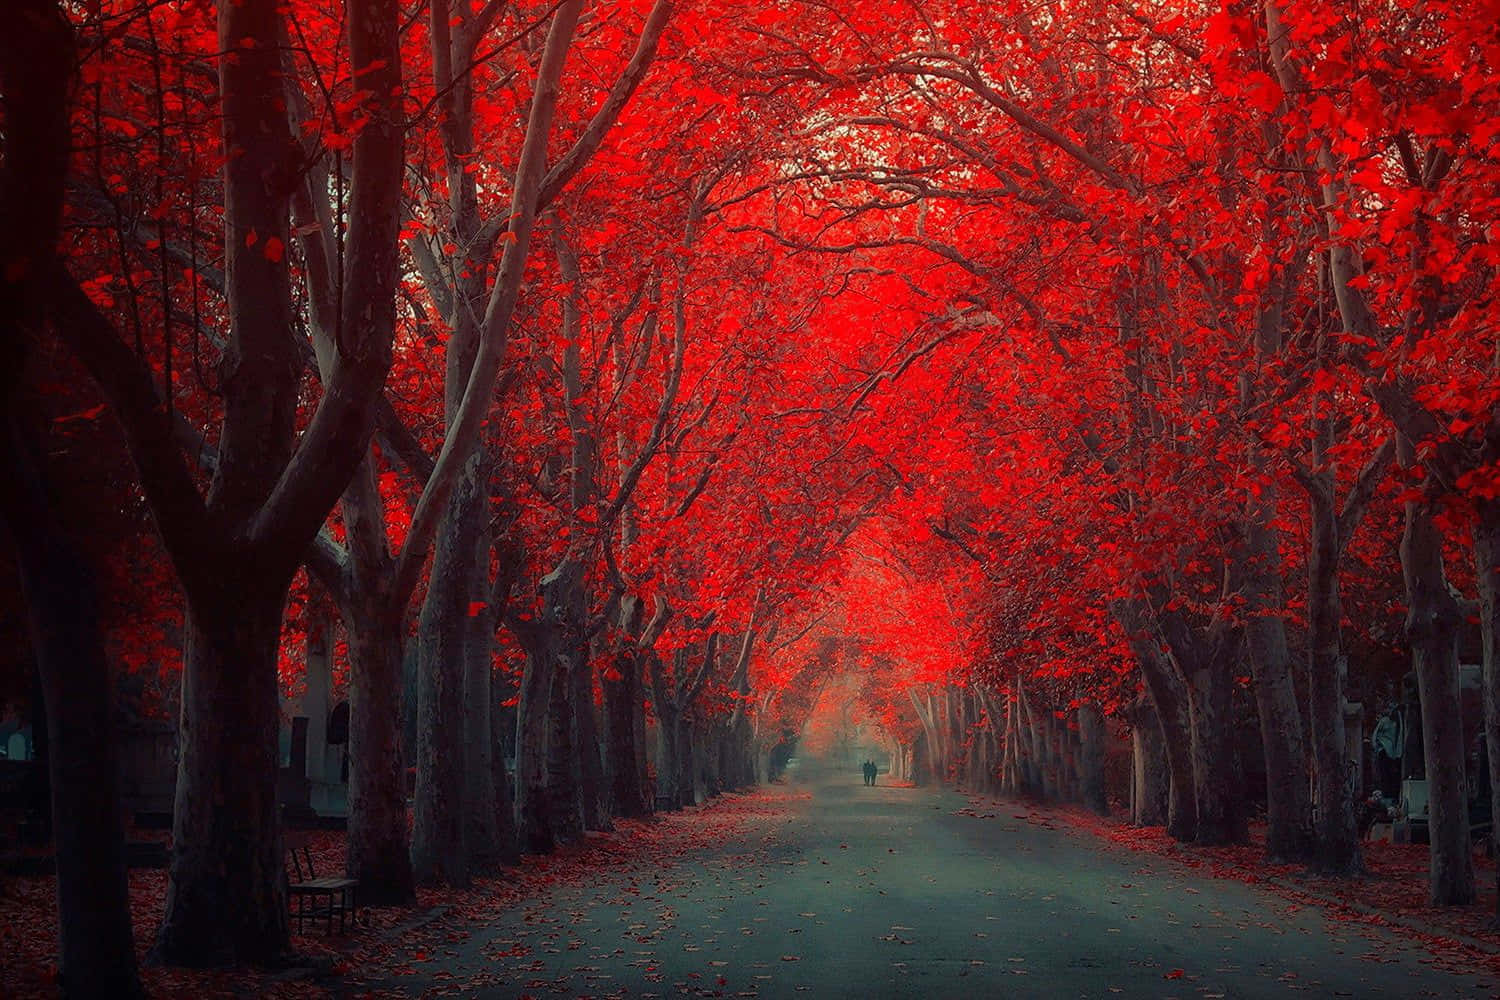 A sea of red trees in the peaceful autumn forest Wallpaper